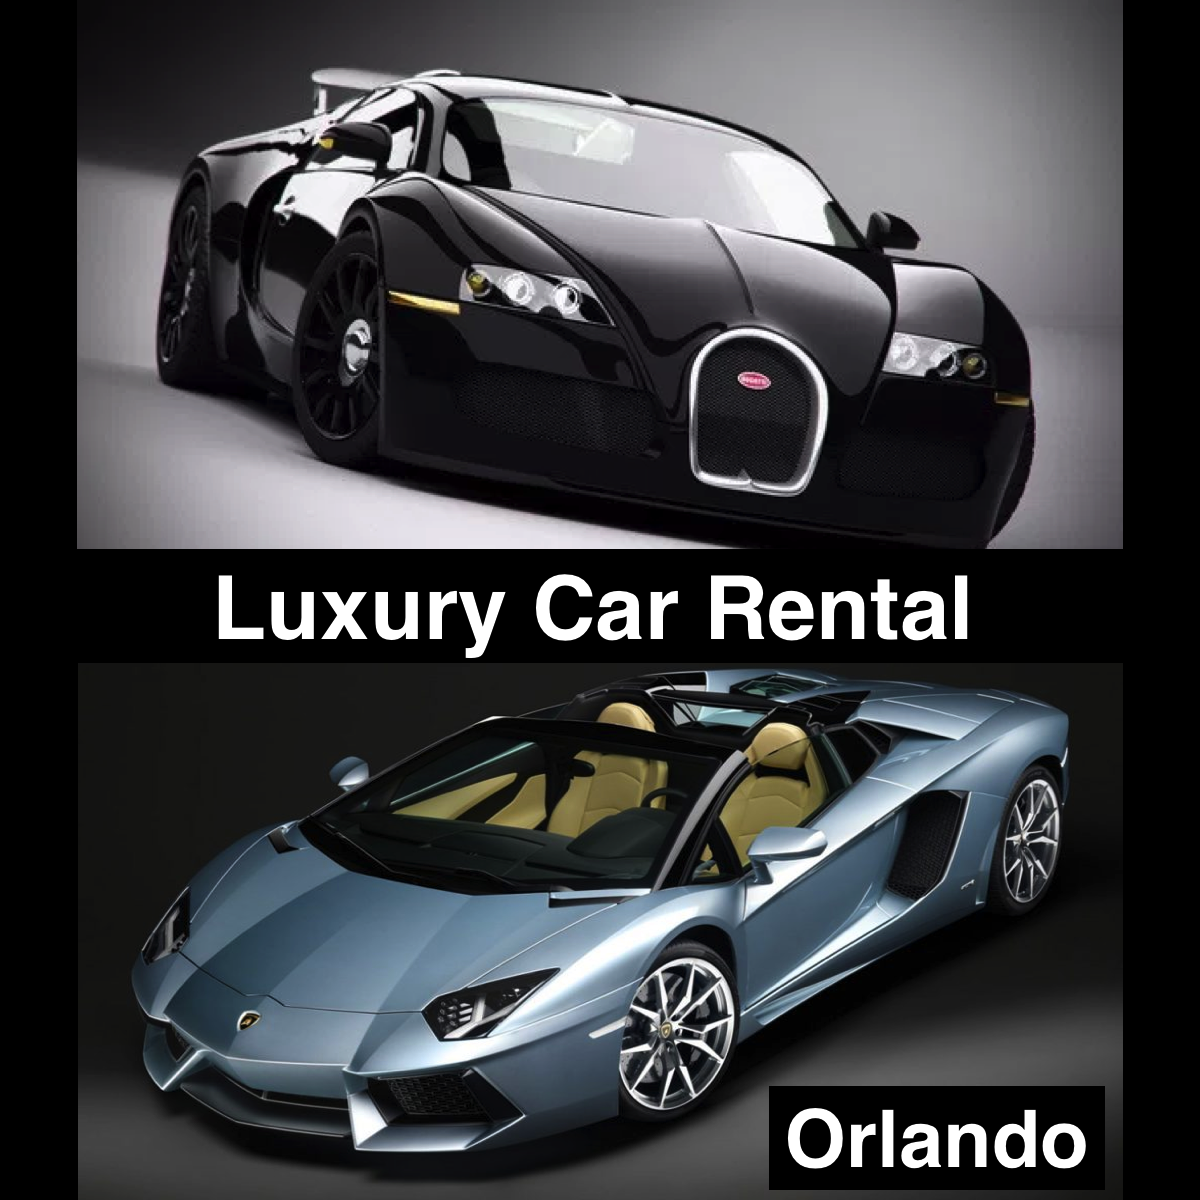 Luxury Car Rental Orlando - All Best Top 10 Lists and Reviews